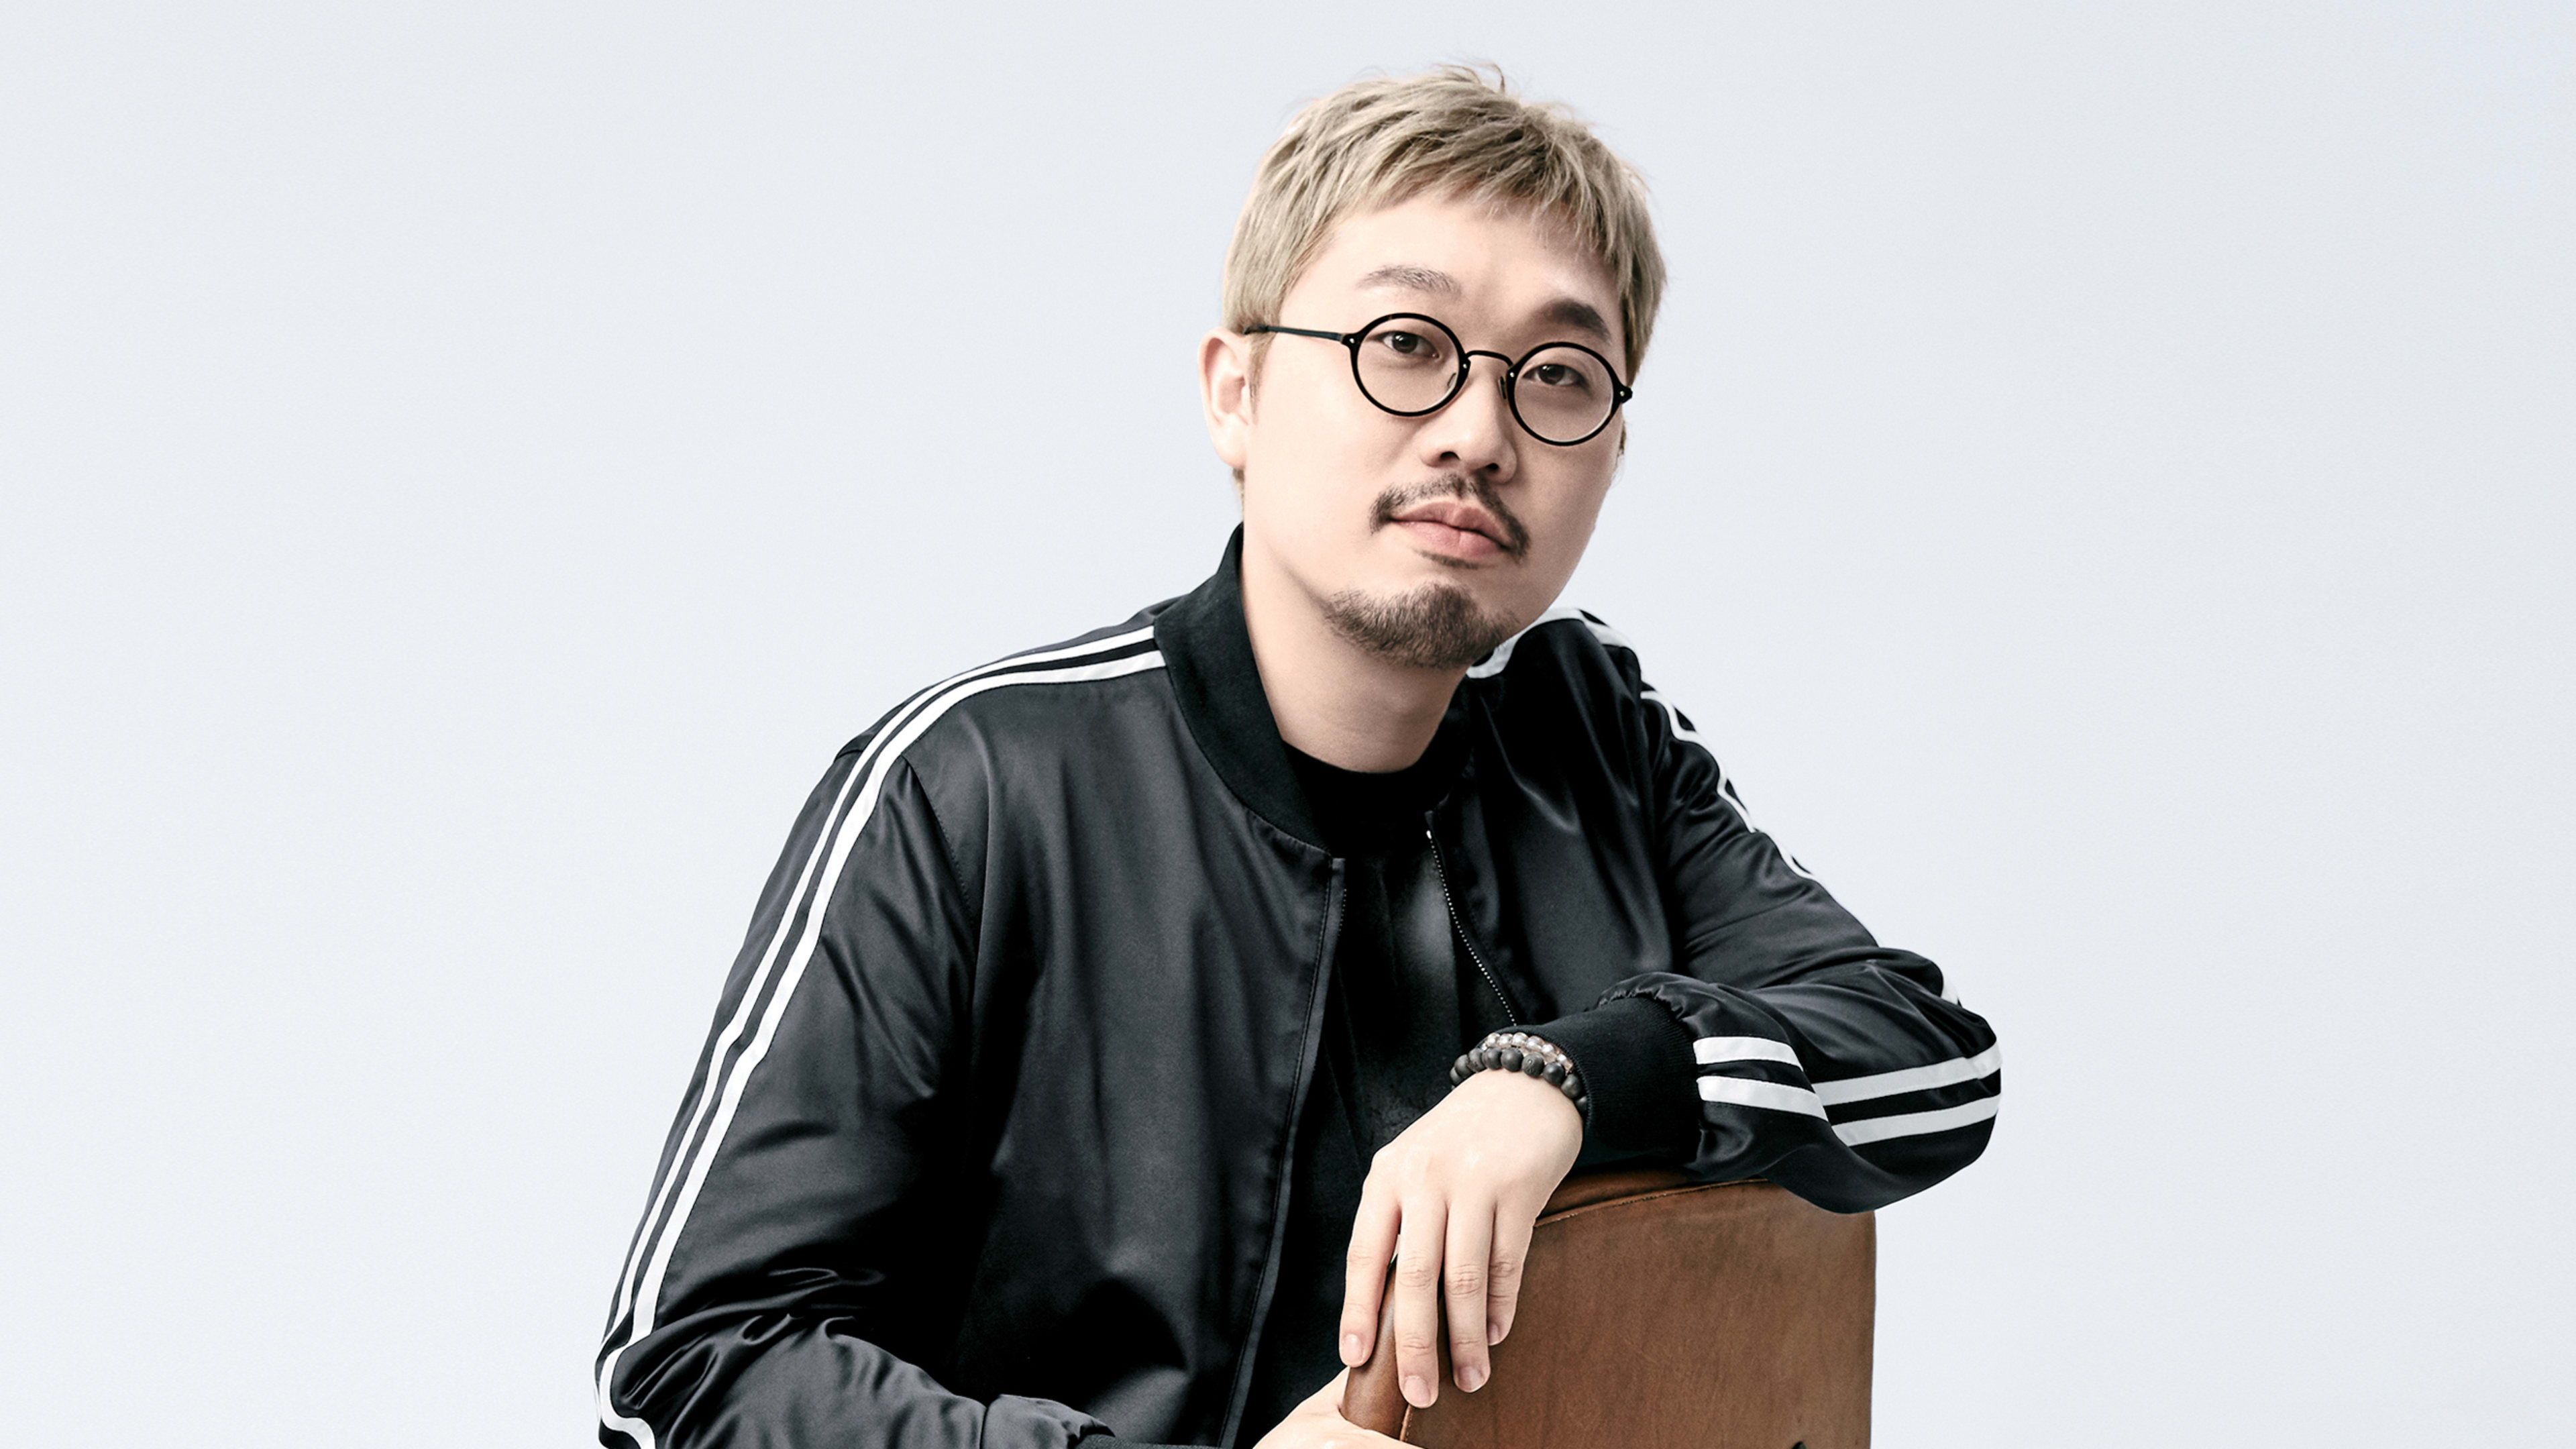 Meet Pdogg, the musical dynamo helping shape BTS’s greatest hits